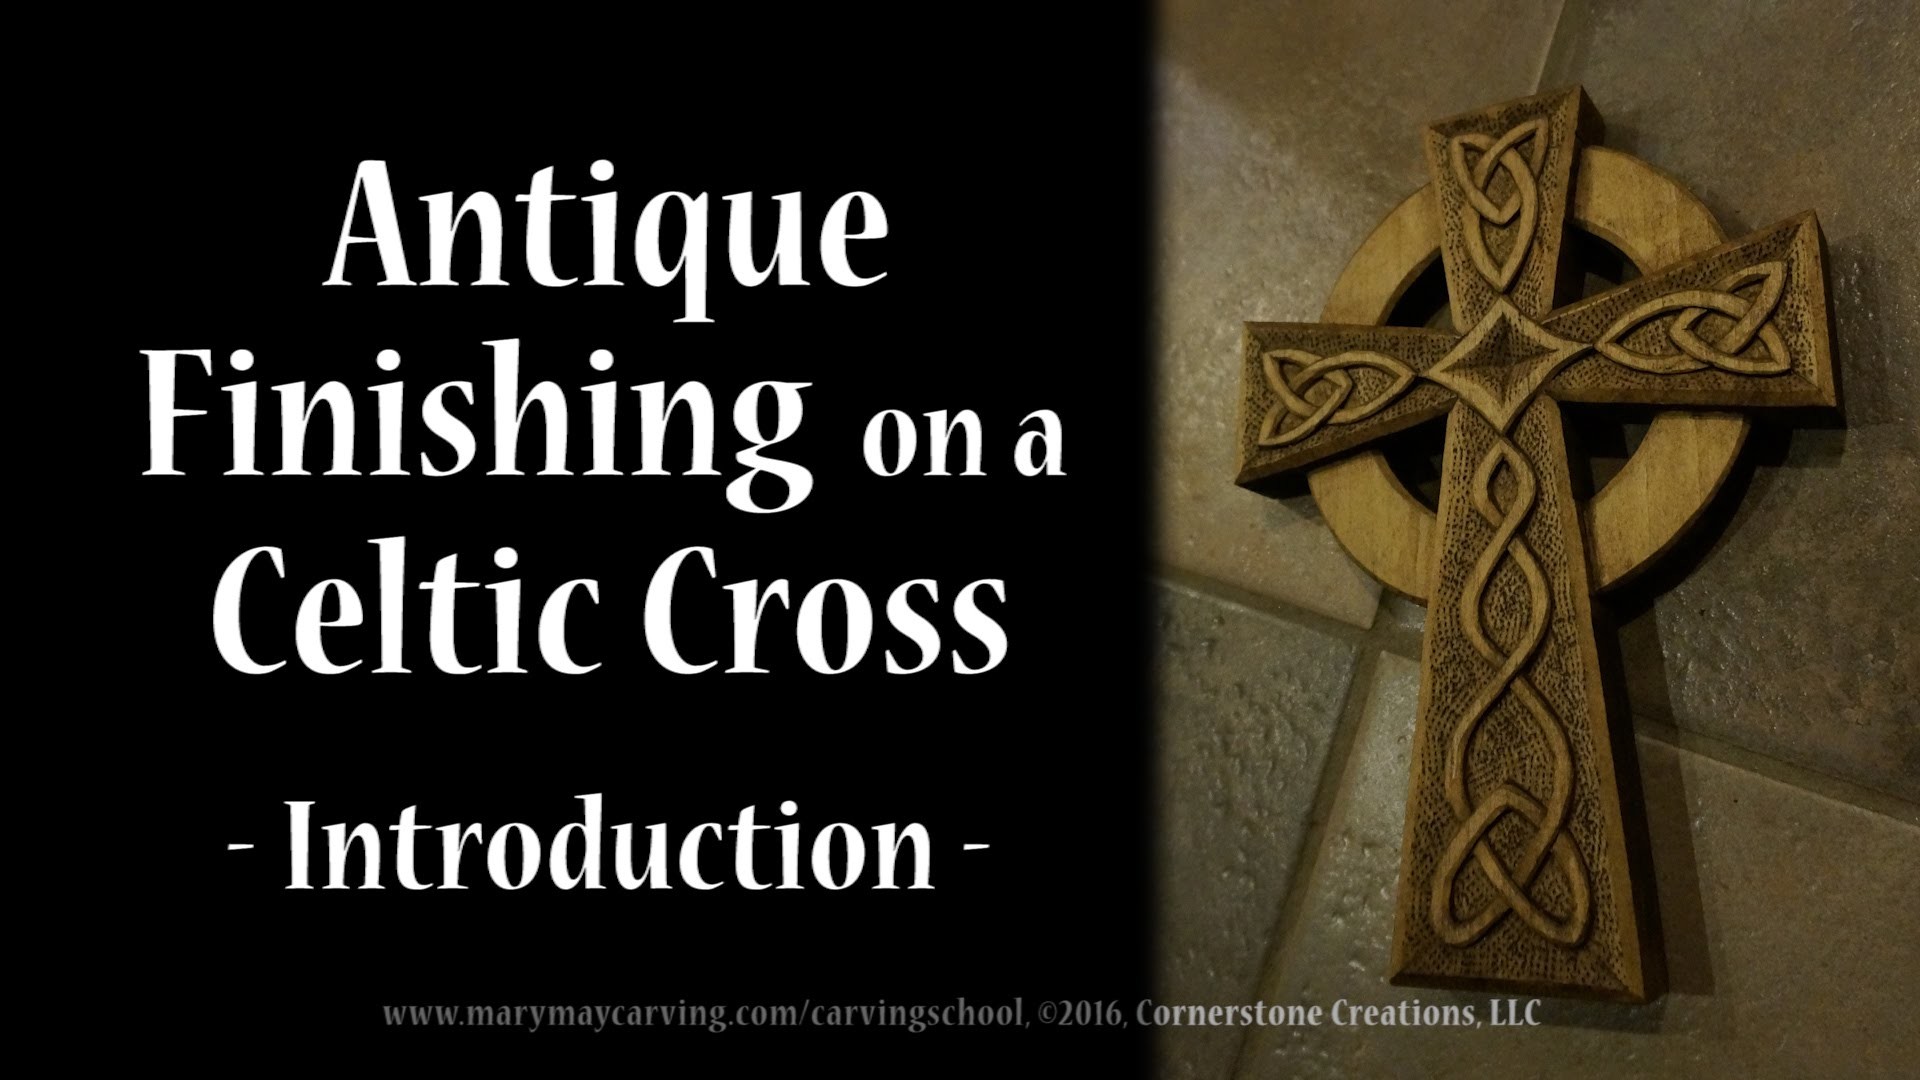 1920x1080 Antique Finishing on a Celtic Cross - Introduction